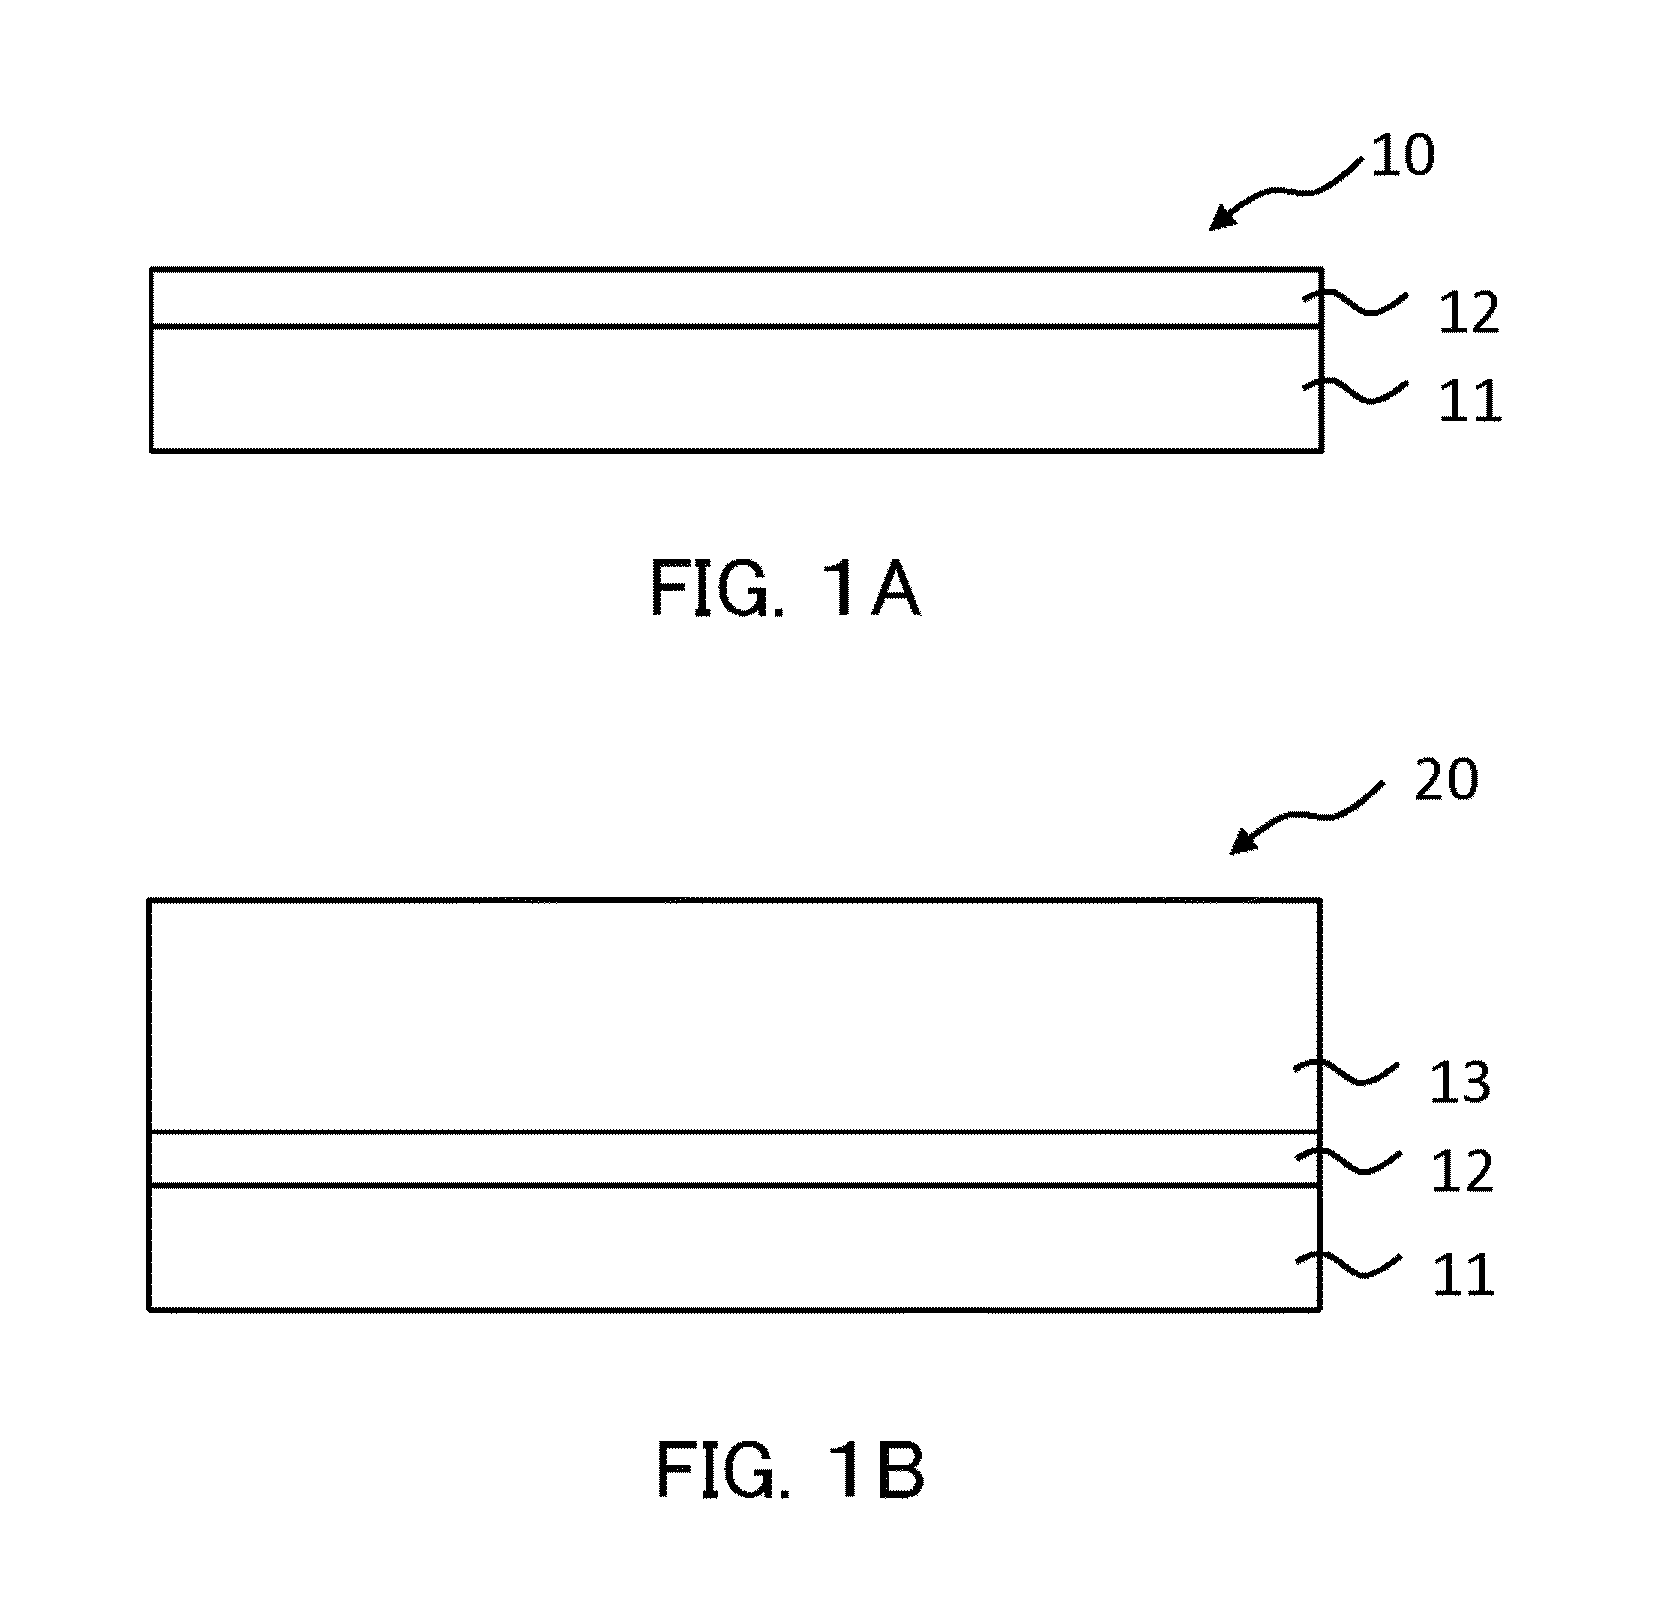 Substrate having annealed aluminum nitride layer formed thereon and method for manufacturing the same